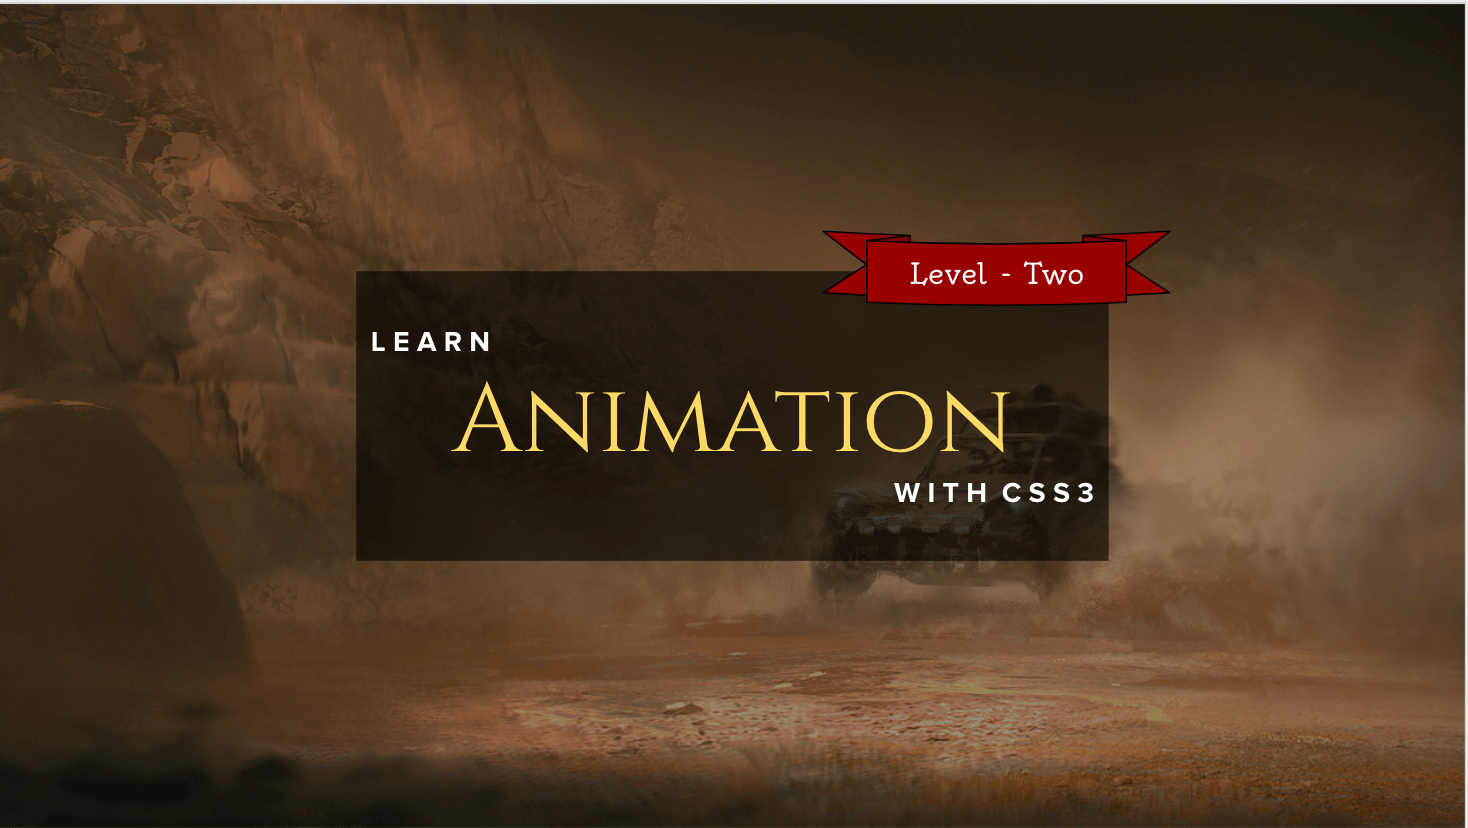 Learn Animation with CSS3